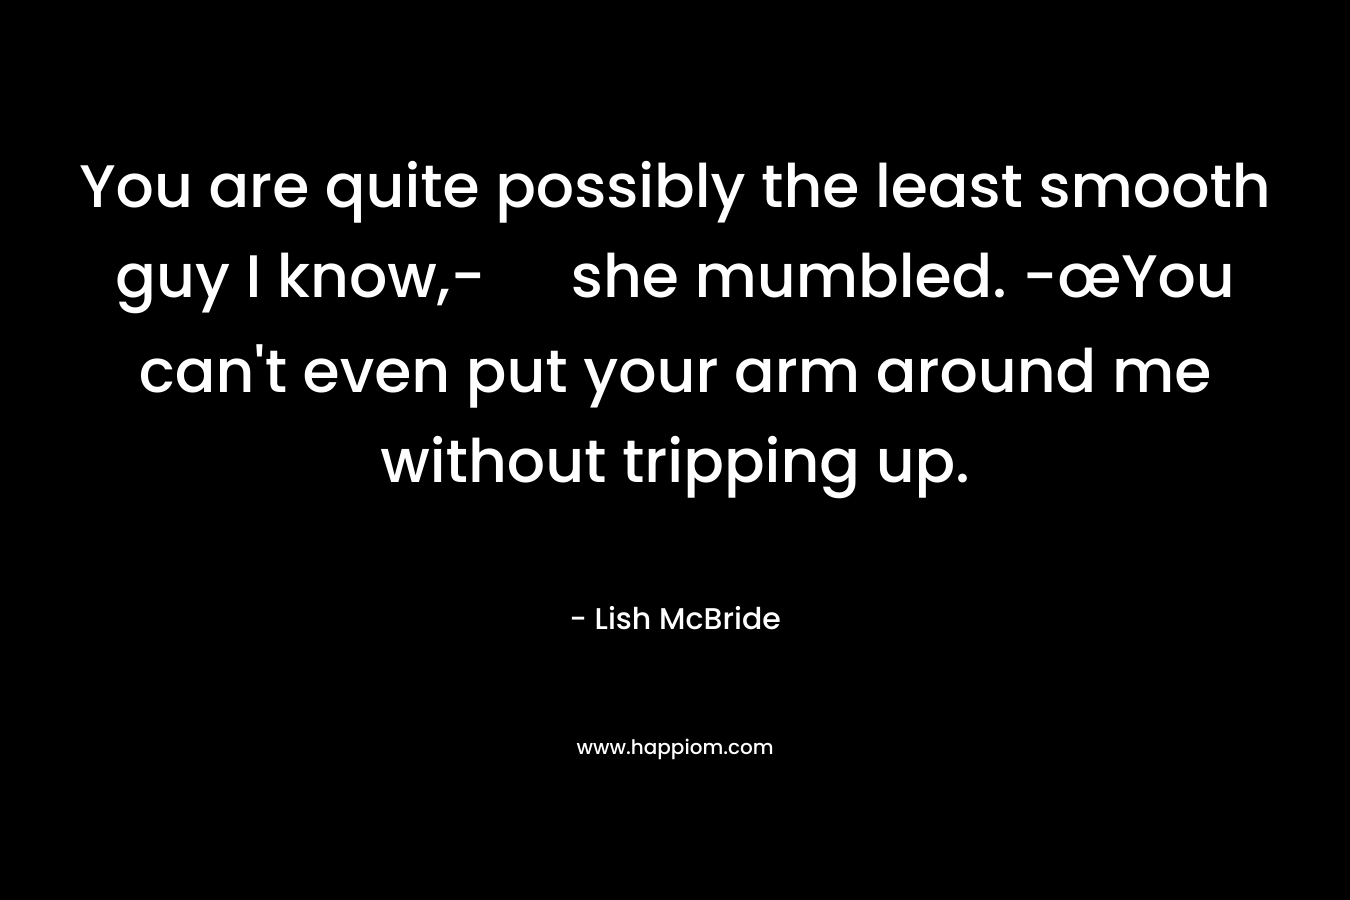 You are quite possibly the least smooth guy I know,- she mumbled. -œYou can’t even put your arm around me without tripping up. – Lish McBride